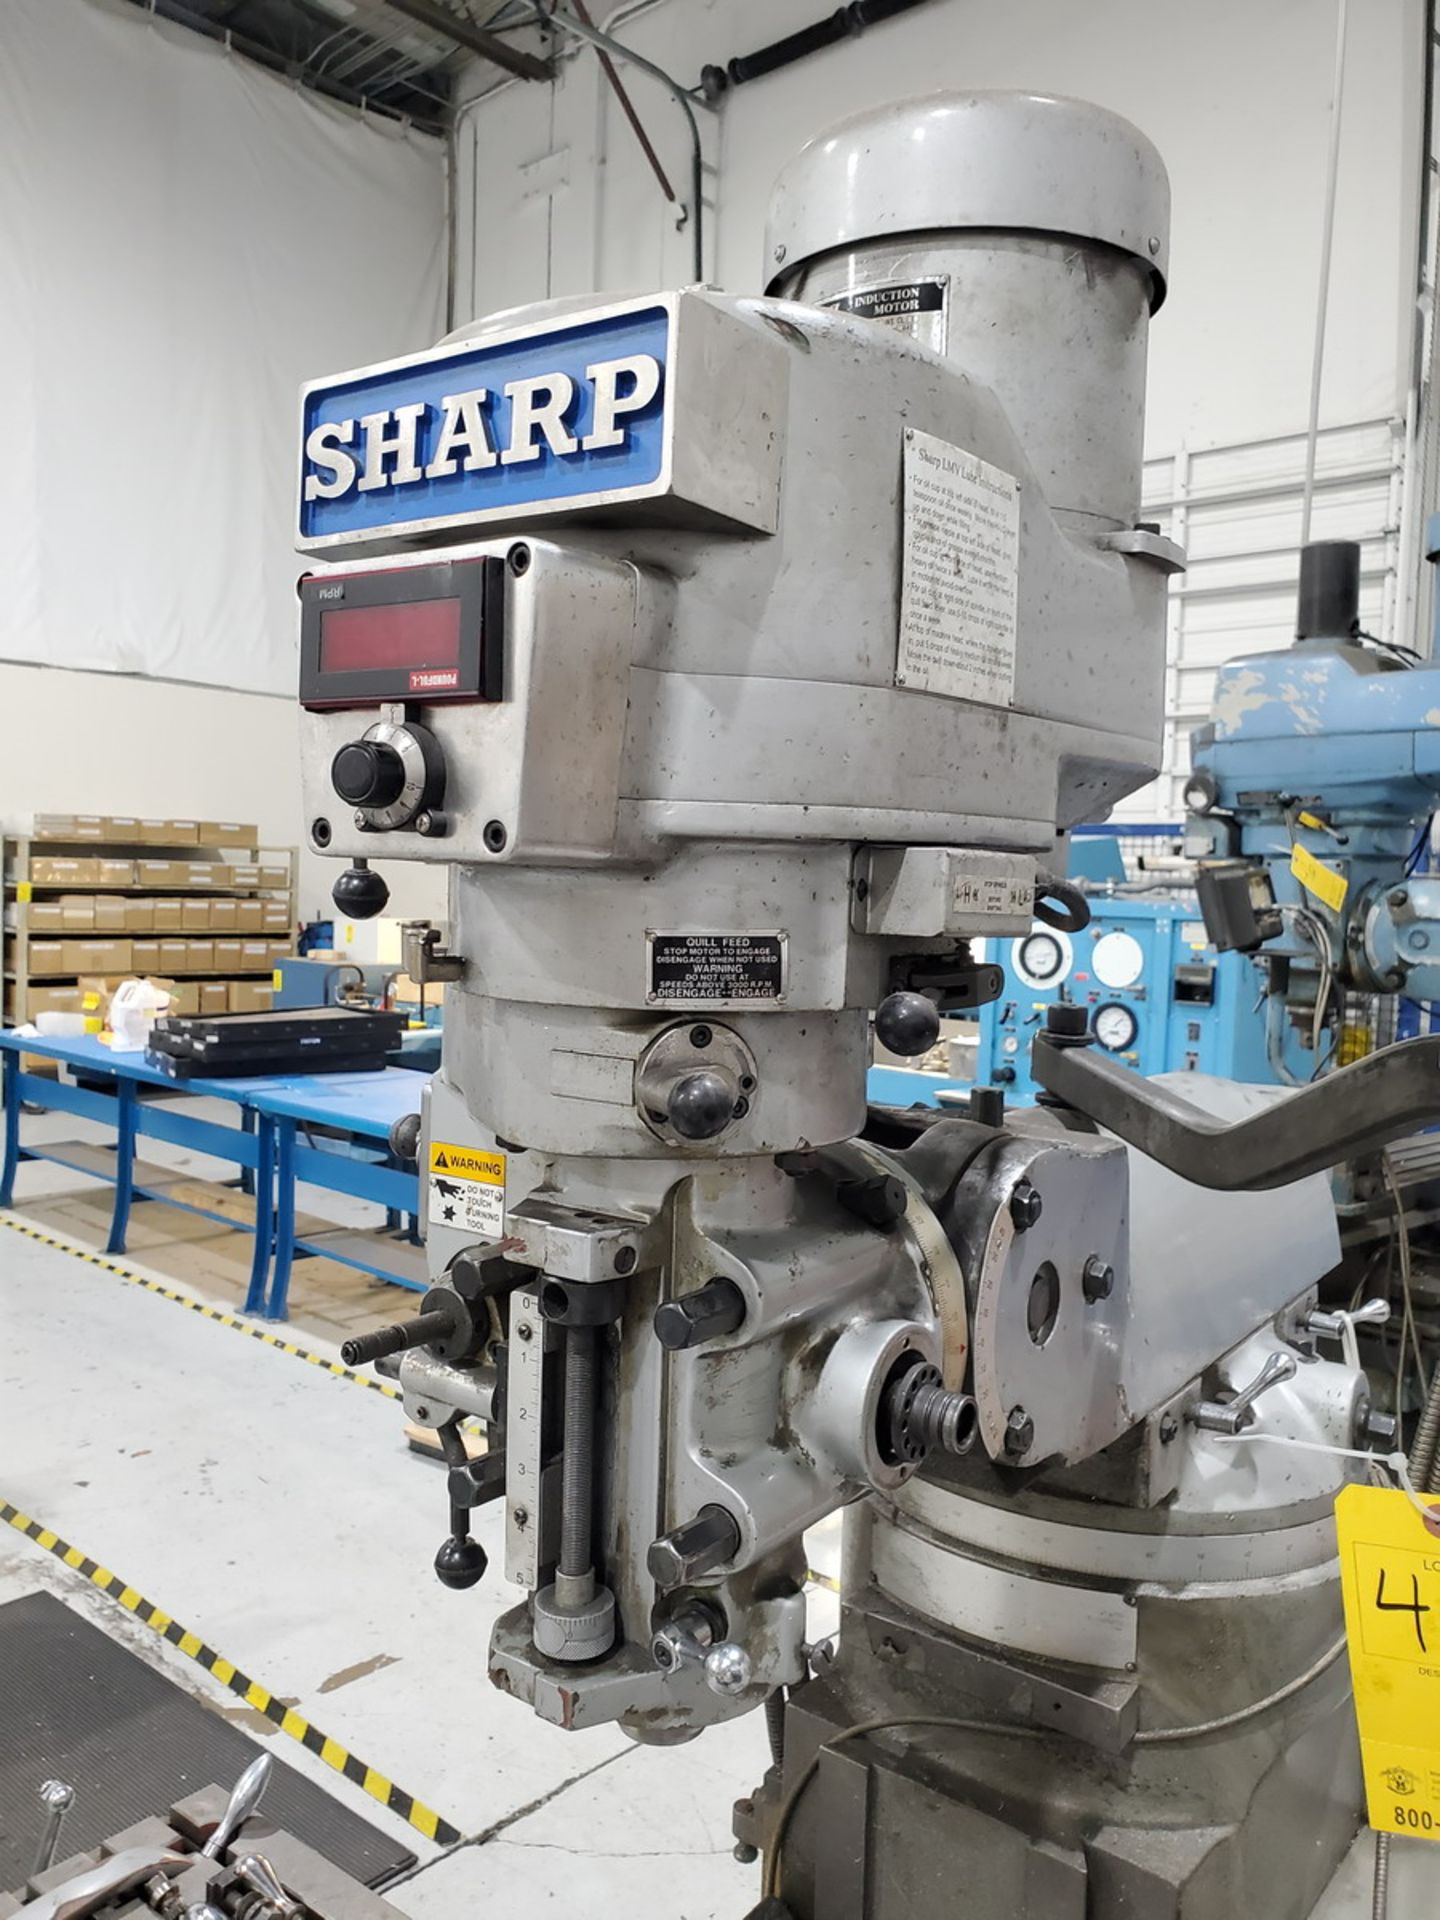 2016 Sharp LMV49 Vertical Milling Machine 3-axis, W/ Acu-Rite Digital Readout; 49" x 9" Slot Table - Image 14 of 17